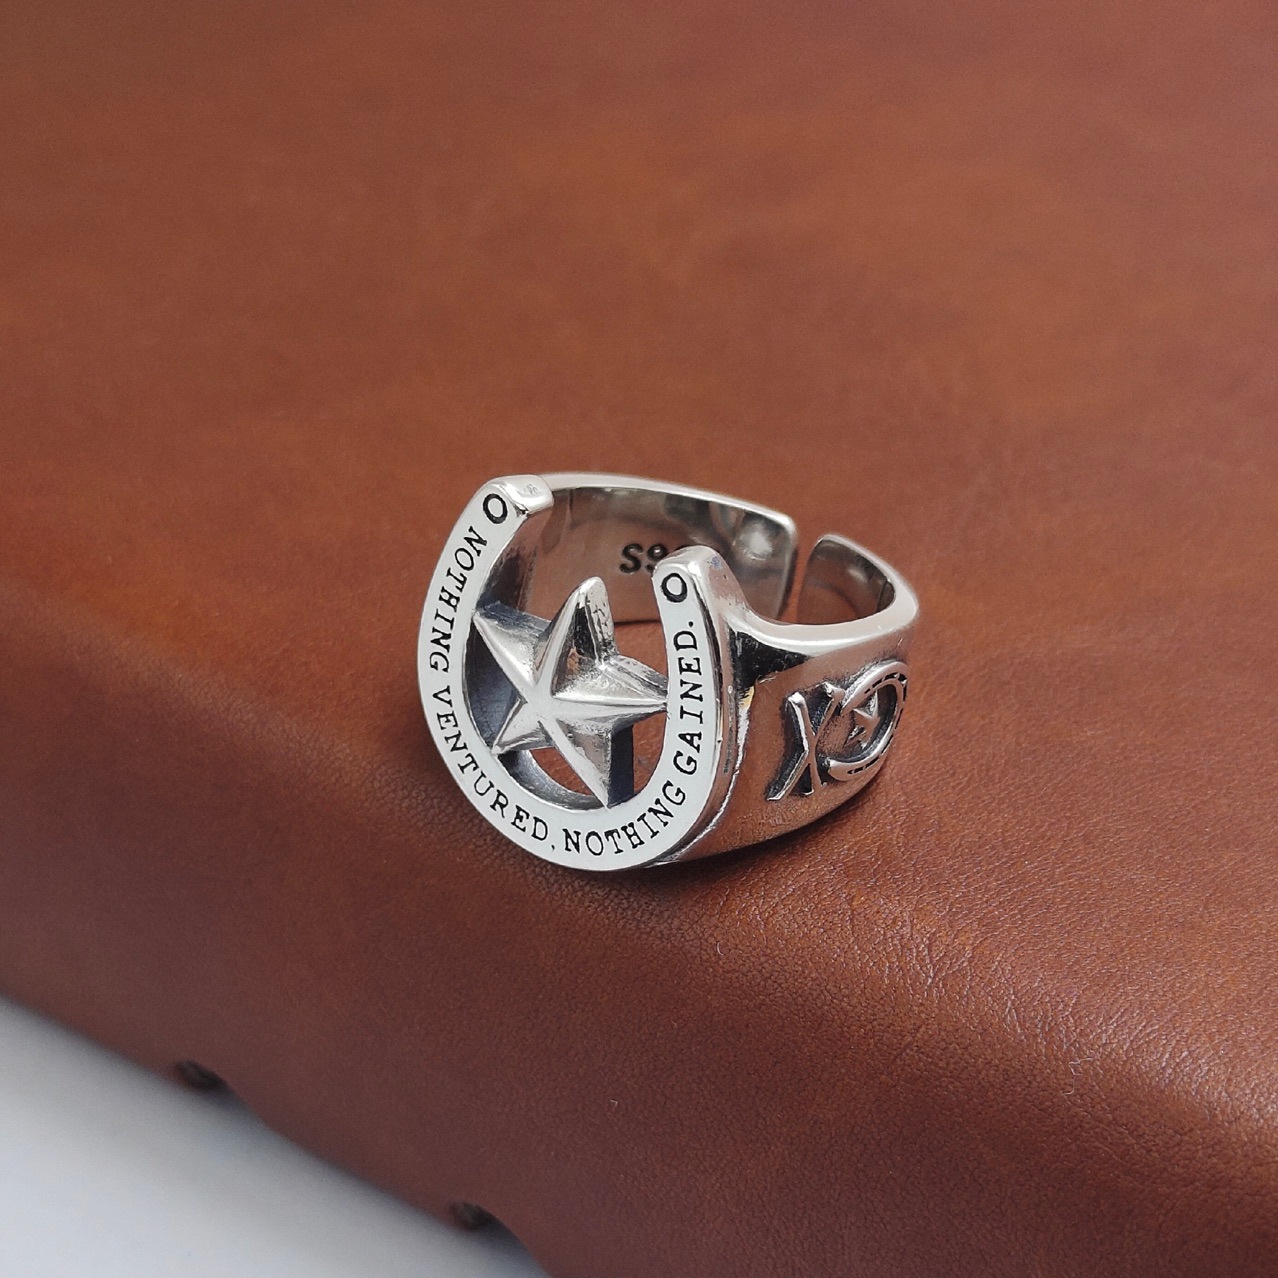 The Men's Silver Star Ring - A Statement Piece for Men's Fashion